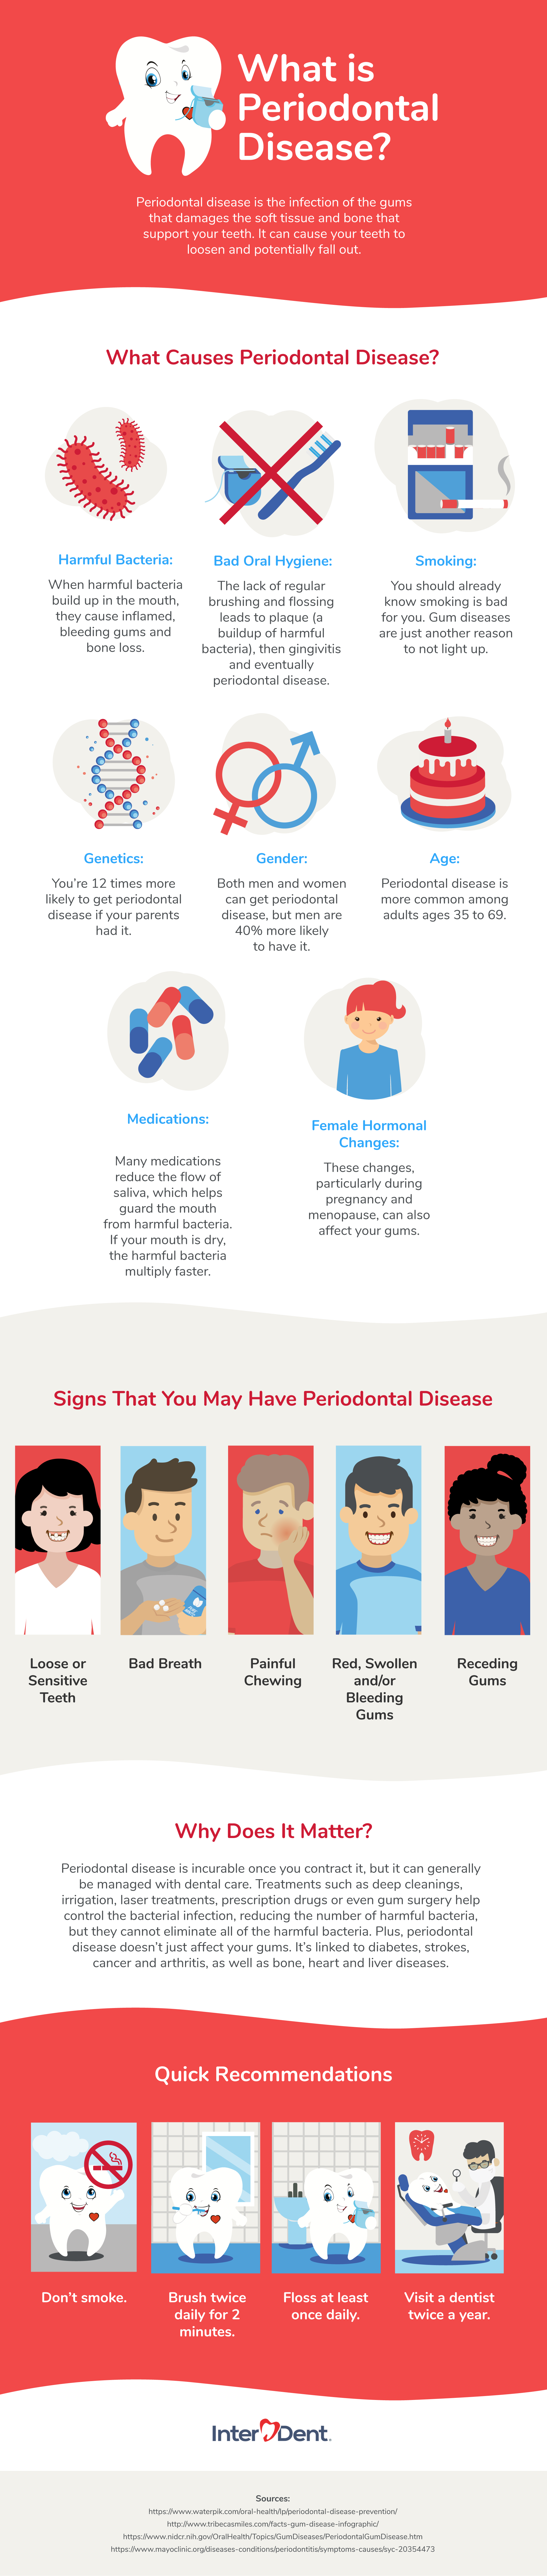 Featured image for “What is Periodontal Disease? An Infographic”